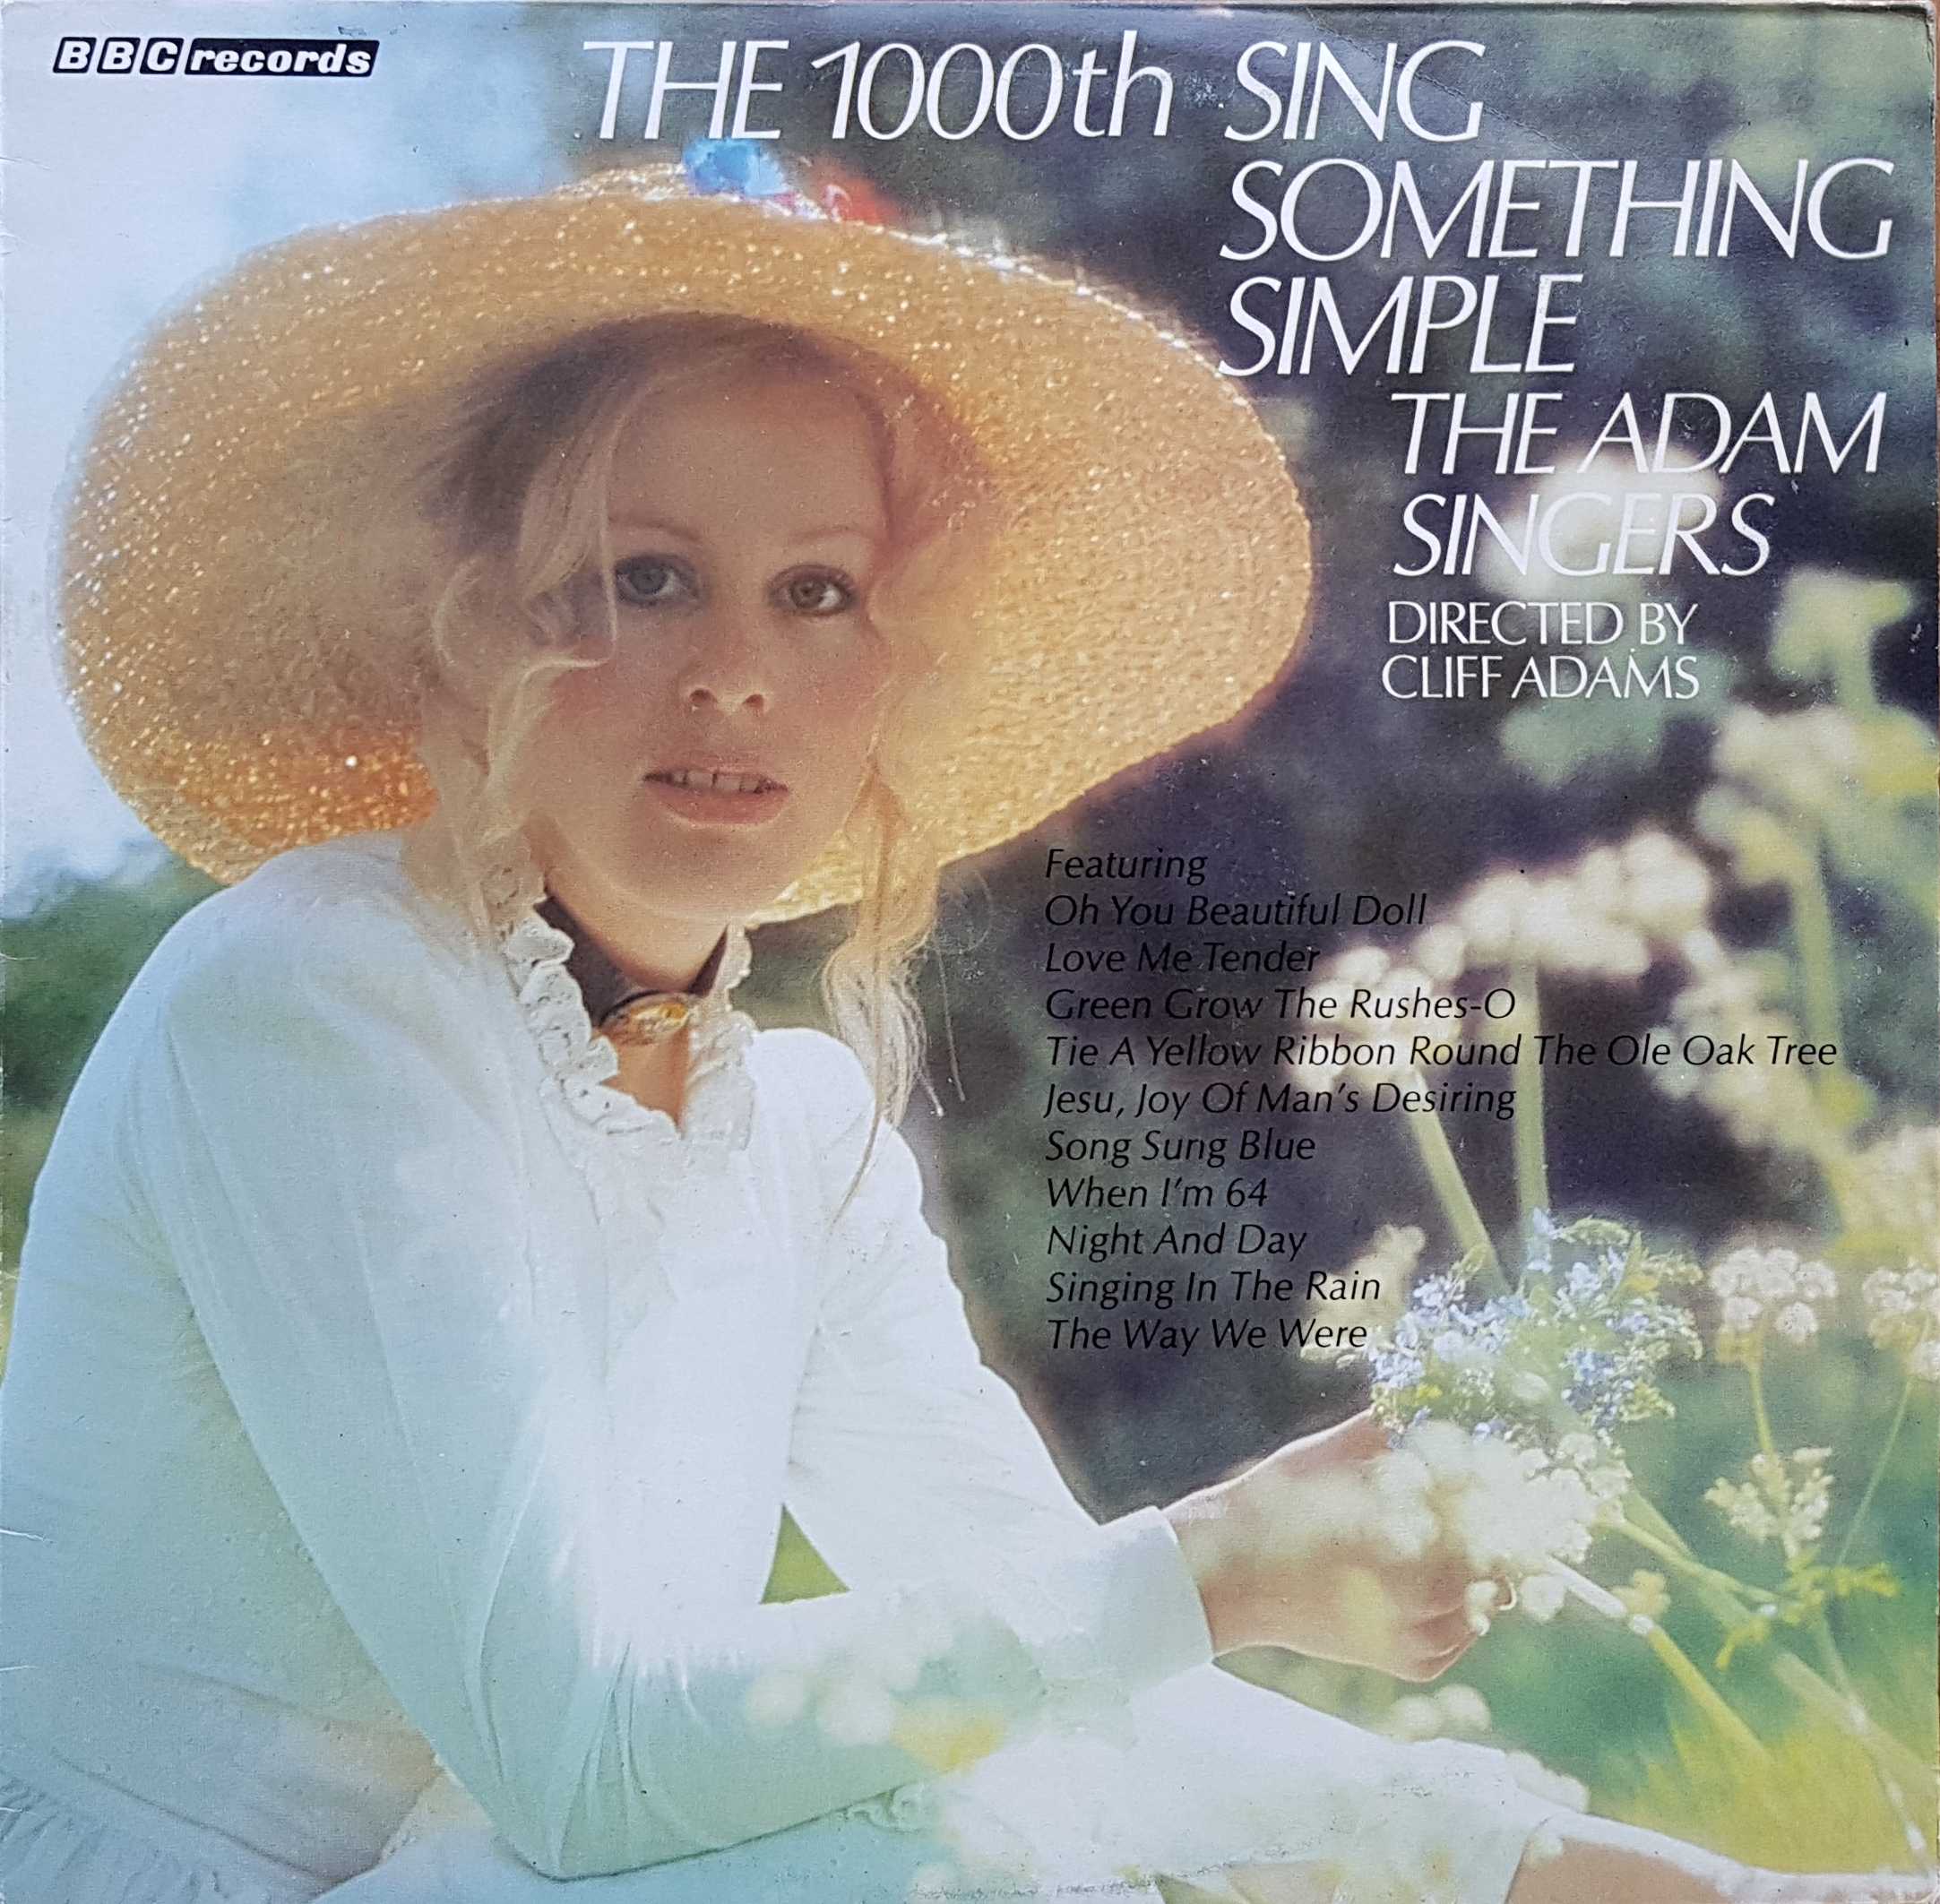 Picture of REH 373 1000th sing something simple by artist Various from the BBC albums - Records and Tapes library